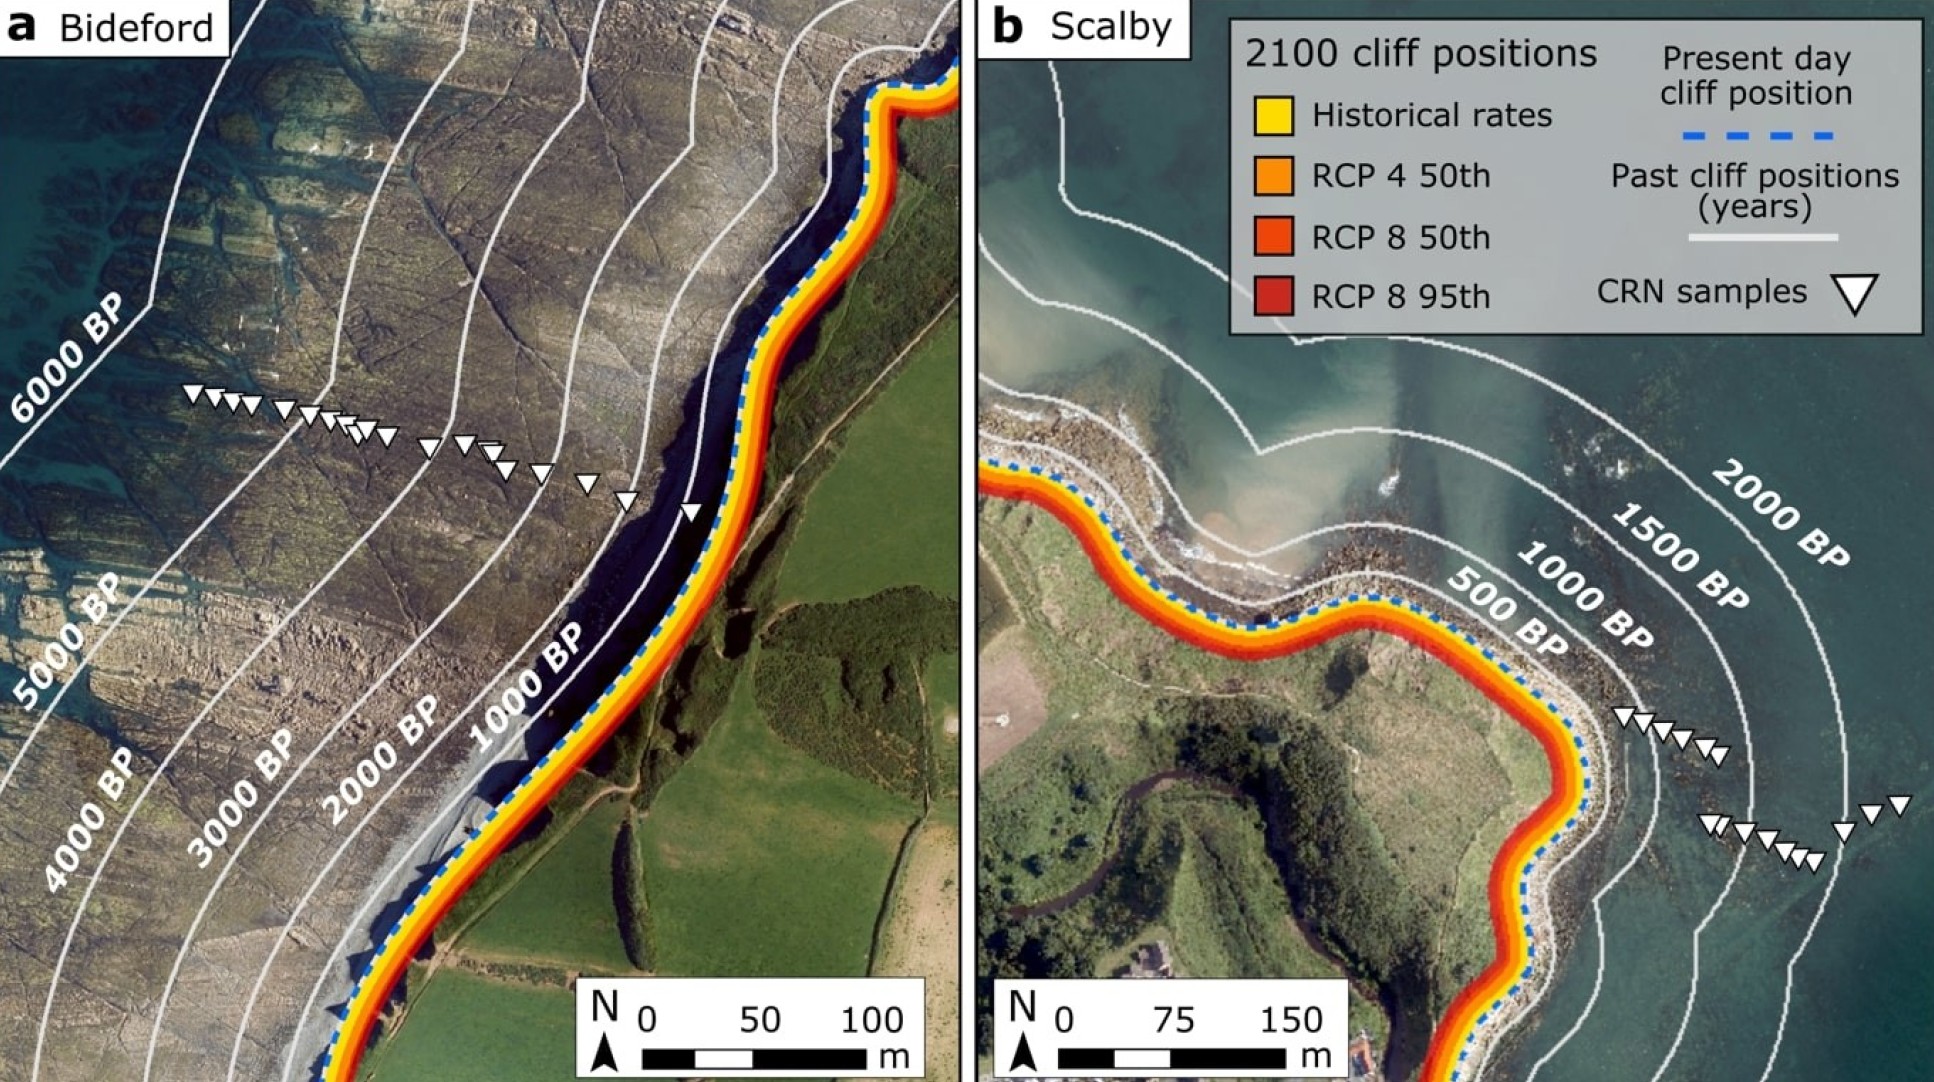 Past, present and forecast future cliff positions by 2100 at Bideford (a) and Scalby (b). RCP 8 (red lines) represents current trajectory of greenhouse gas emissions.